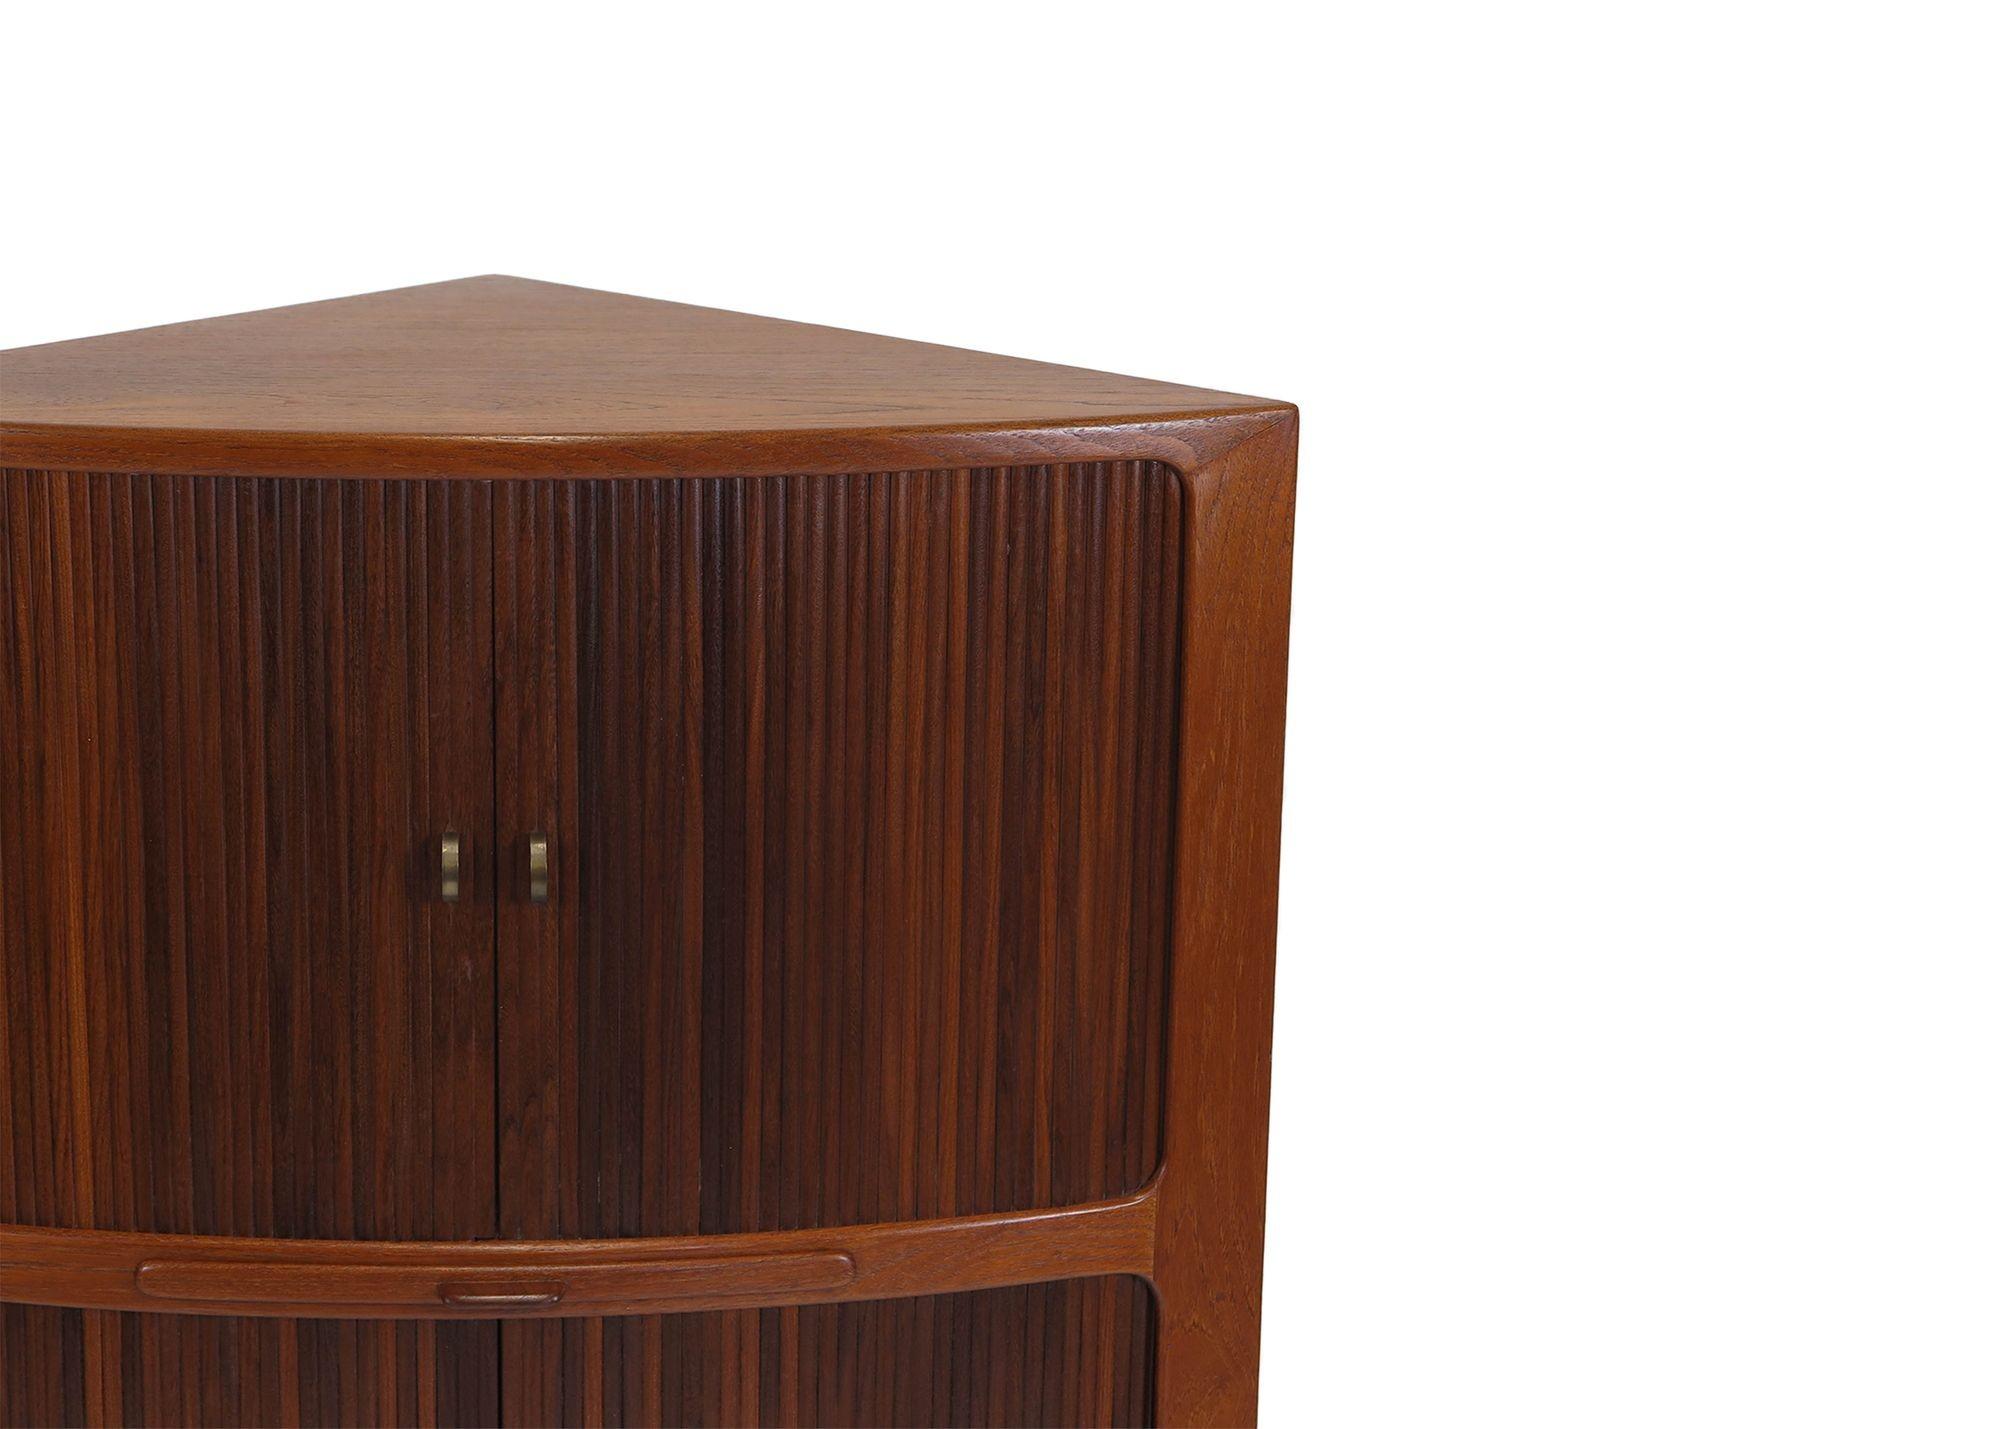 Midcentury Teak corner cabinet attributed to Danish designer, Johannes Andersen. The cabinet is crafted of teak with two sections of tambour doors. The upper section reveals an interior with an etched mirror back, black glass base, shelf and